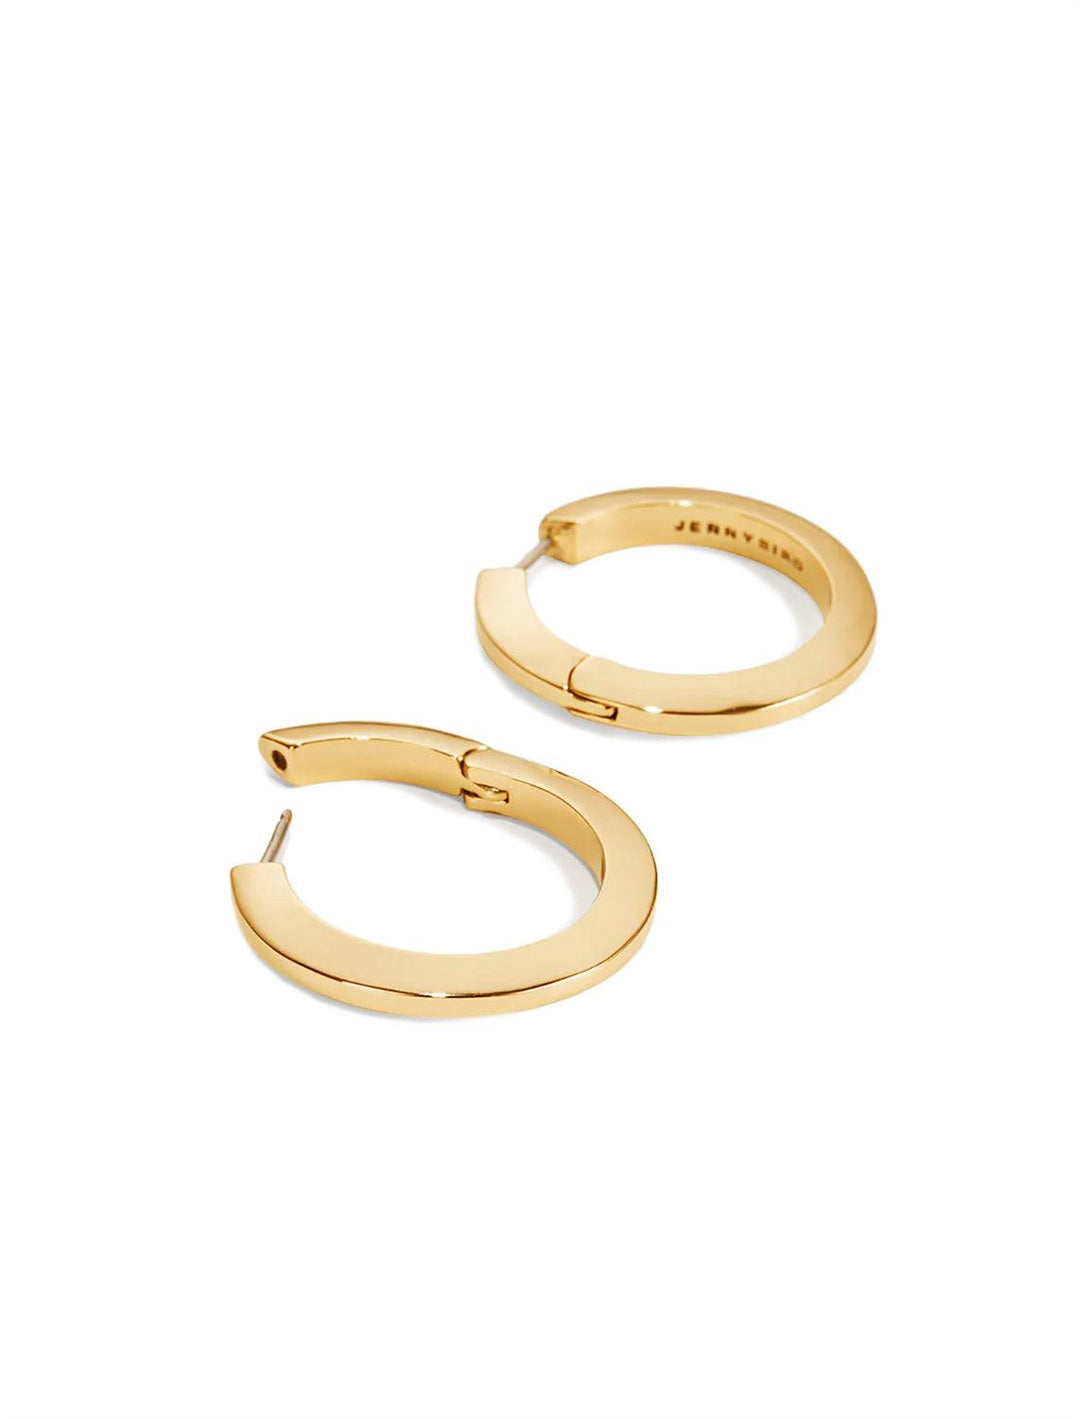 Side angle view of Jenny Bird's Toni Hinged Hoop Earrings in 14K Gold-Dipped Brass.